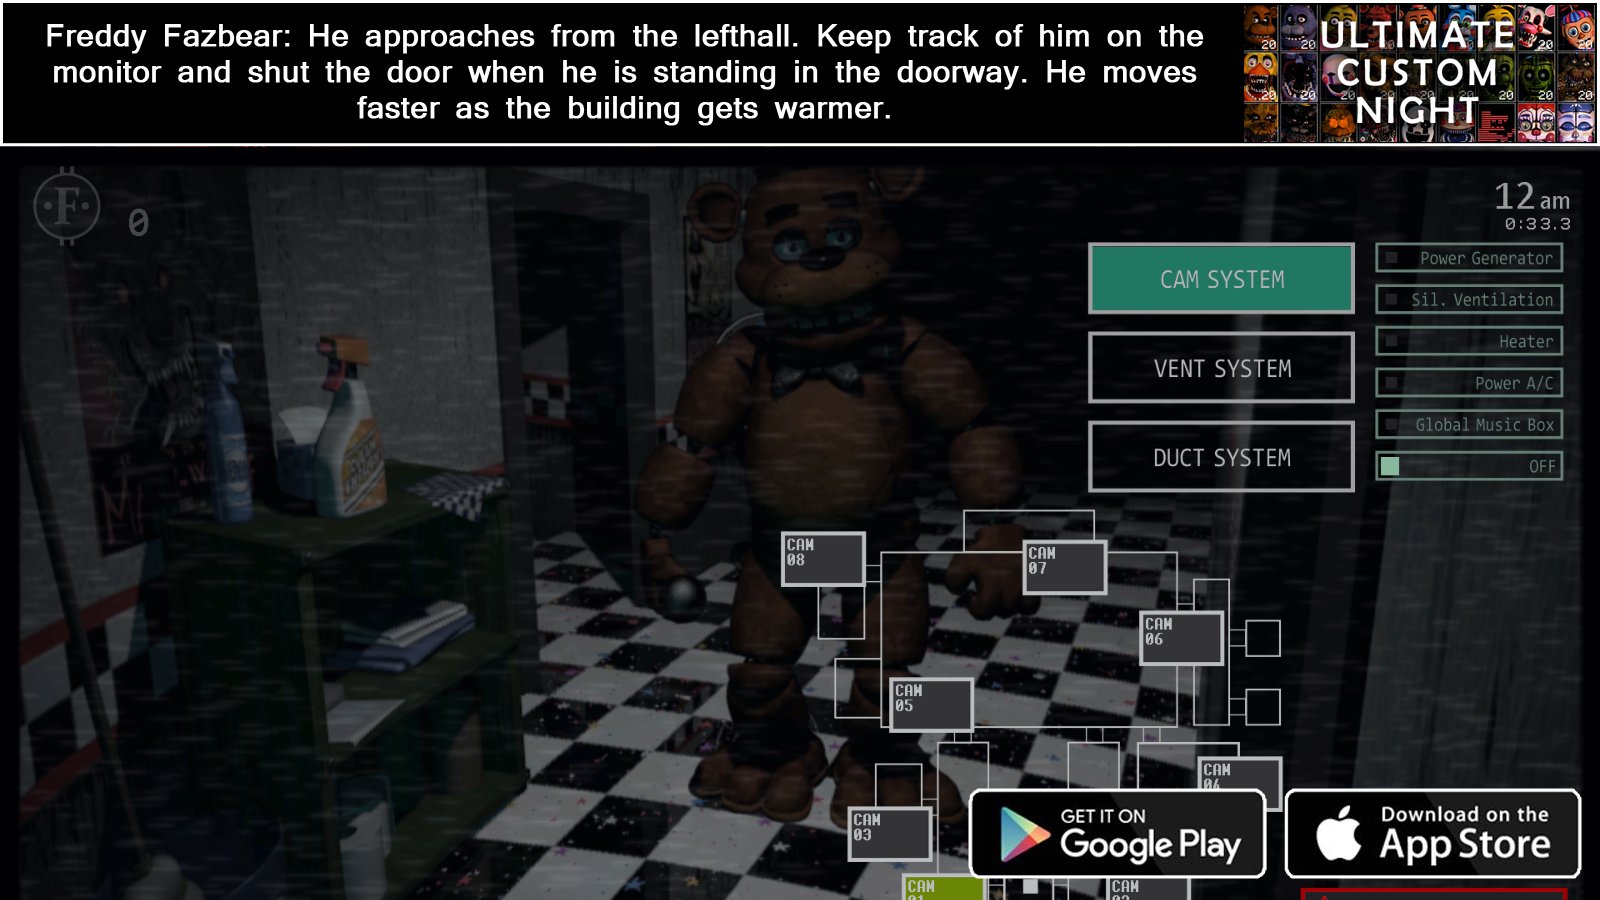 Play Five Nights at Freddy' s: Ultimate Custom Night, a game of